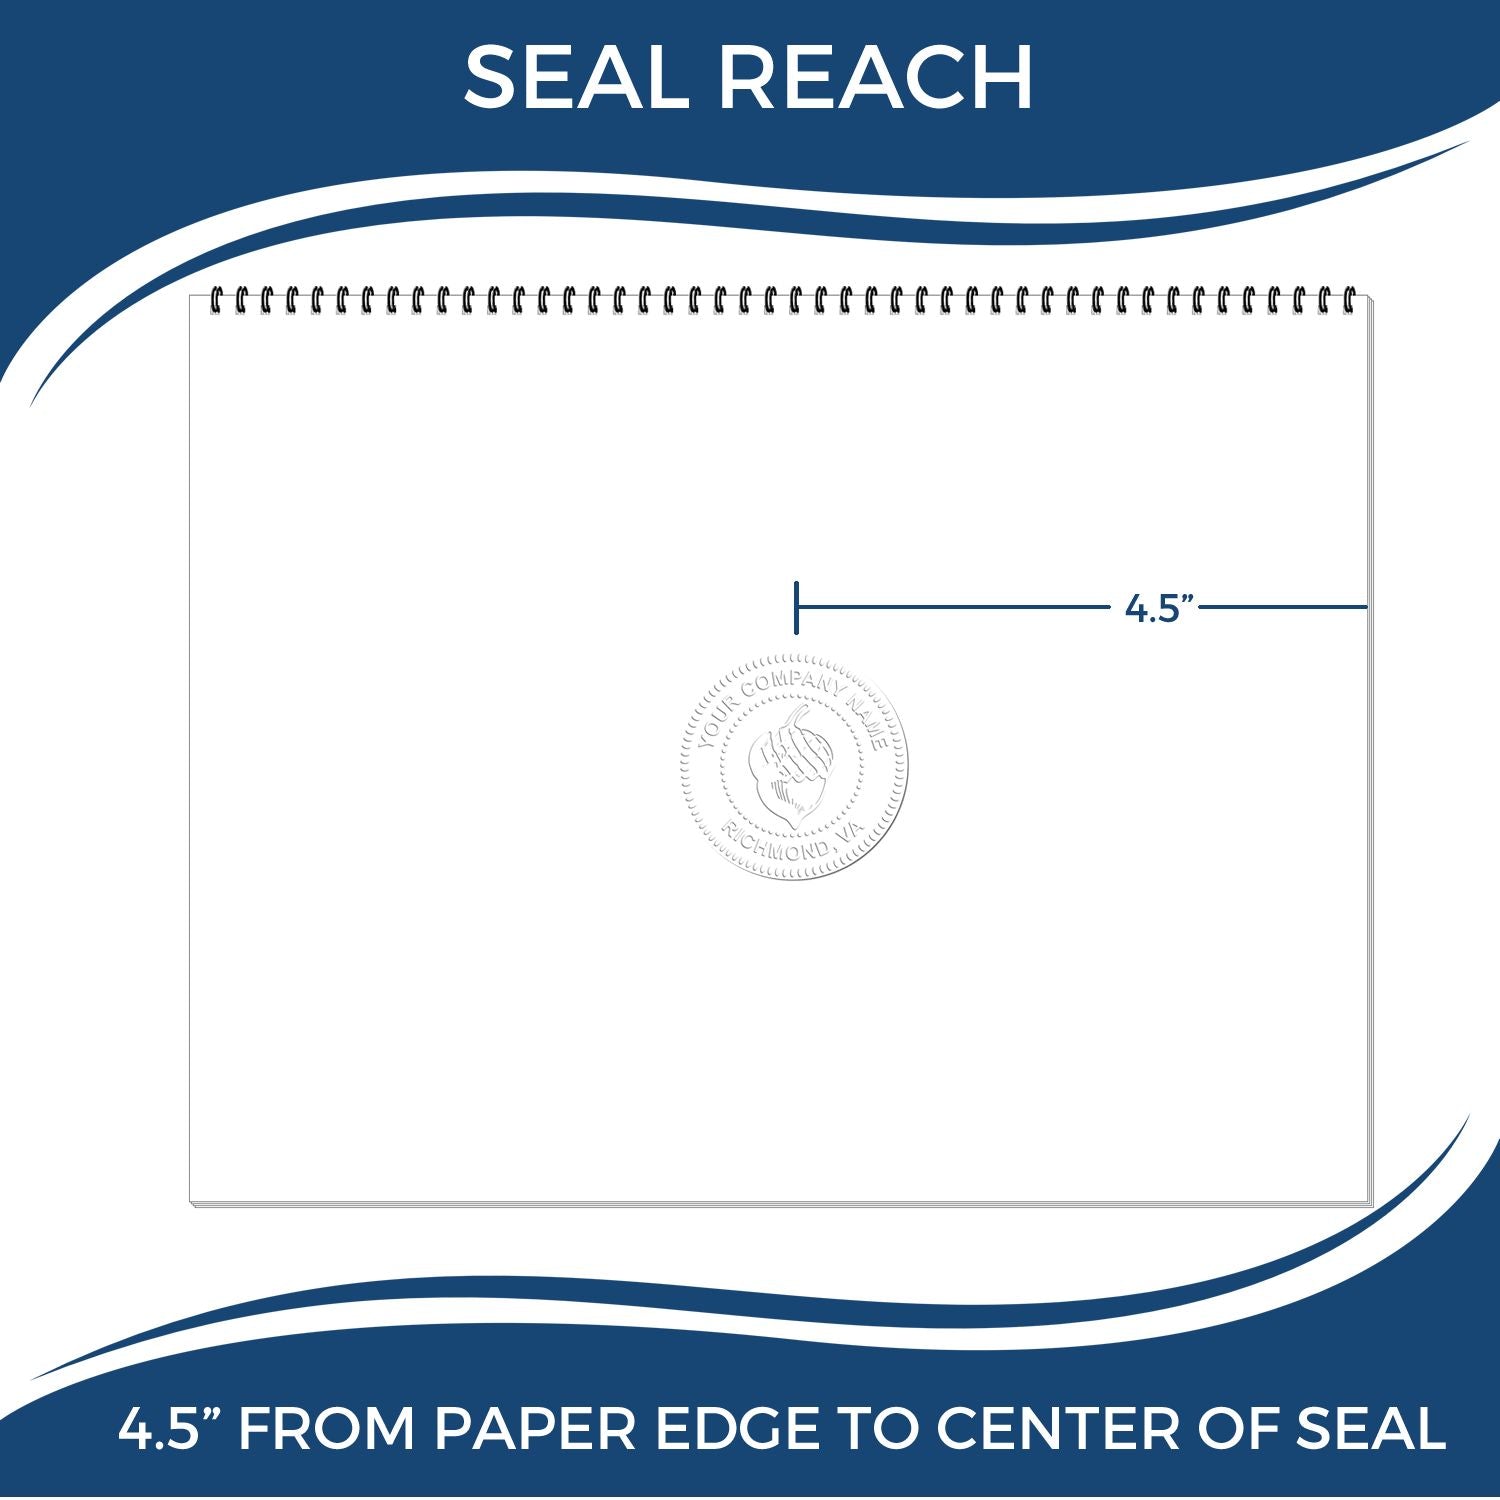 An infographic showing the seal reach which is represented by a ruler and a miniature seal image of the Extended Long Reach Minnesota Architect Seal Embosser